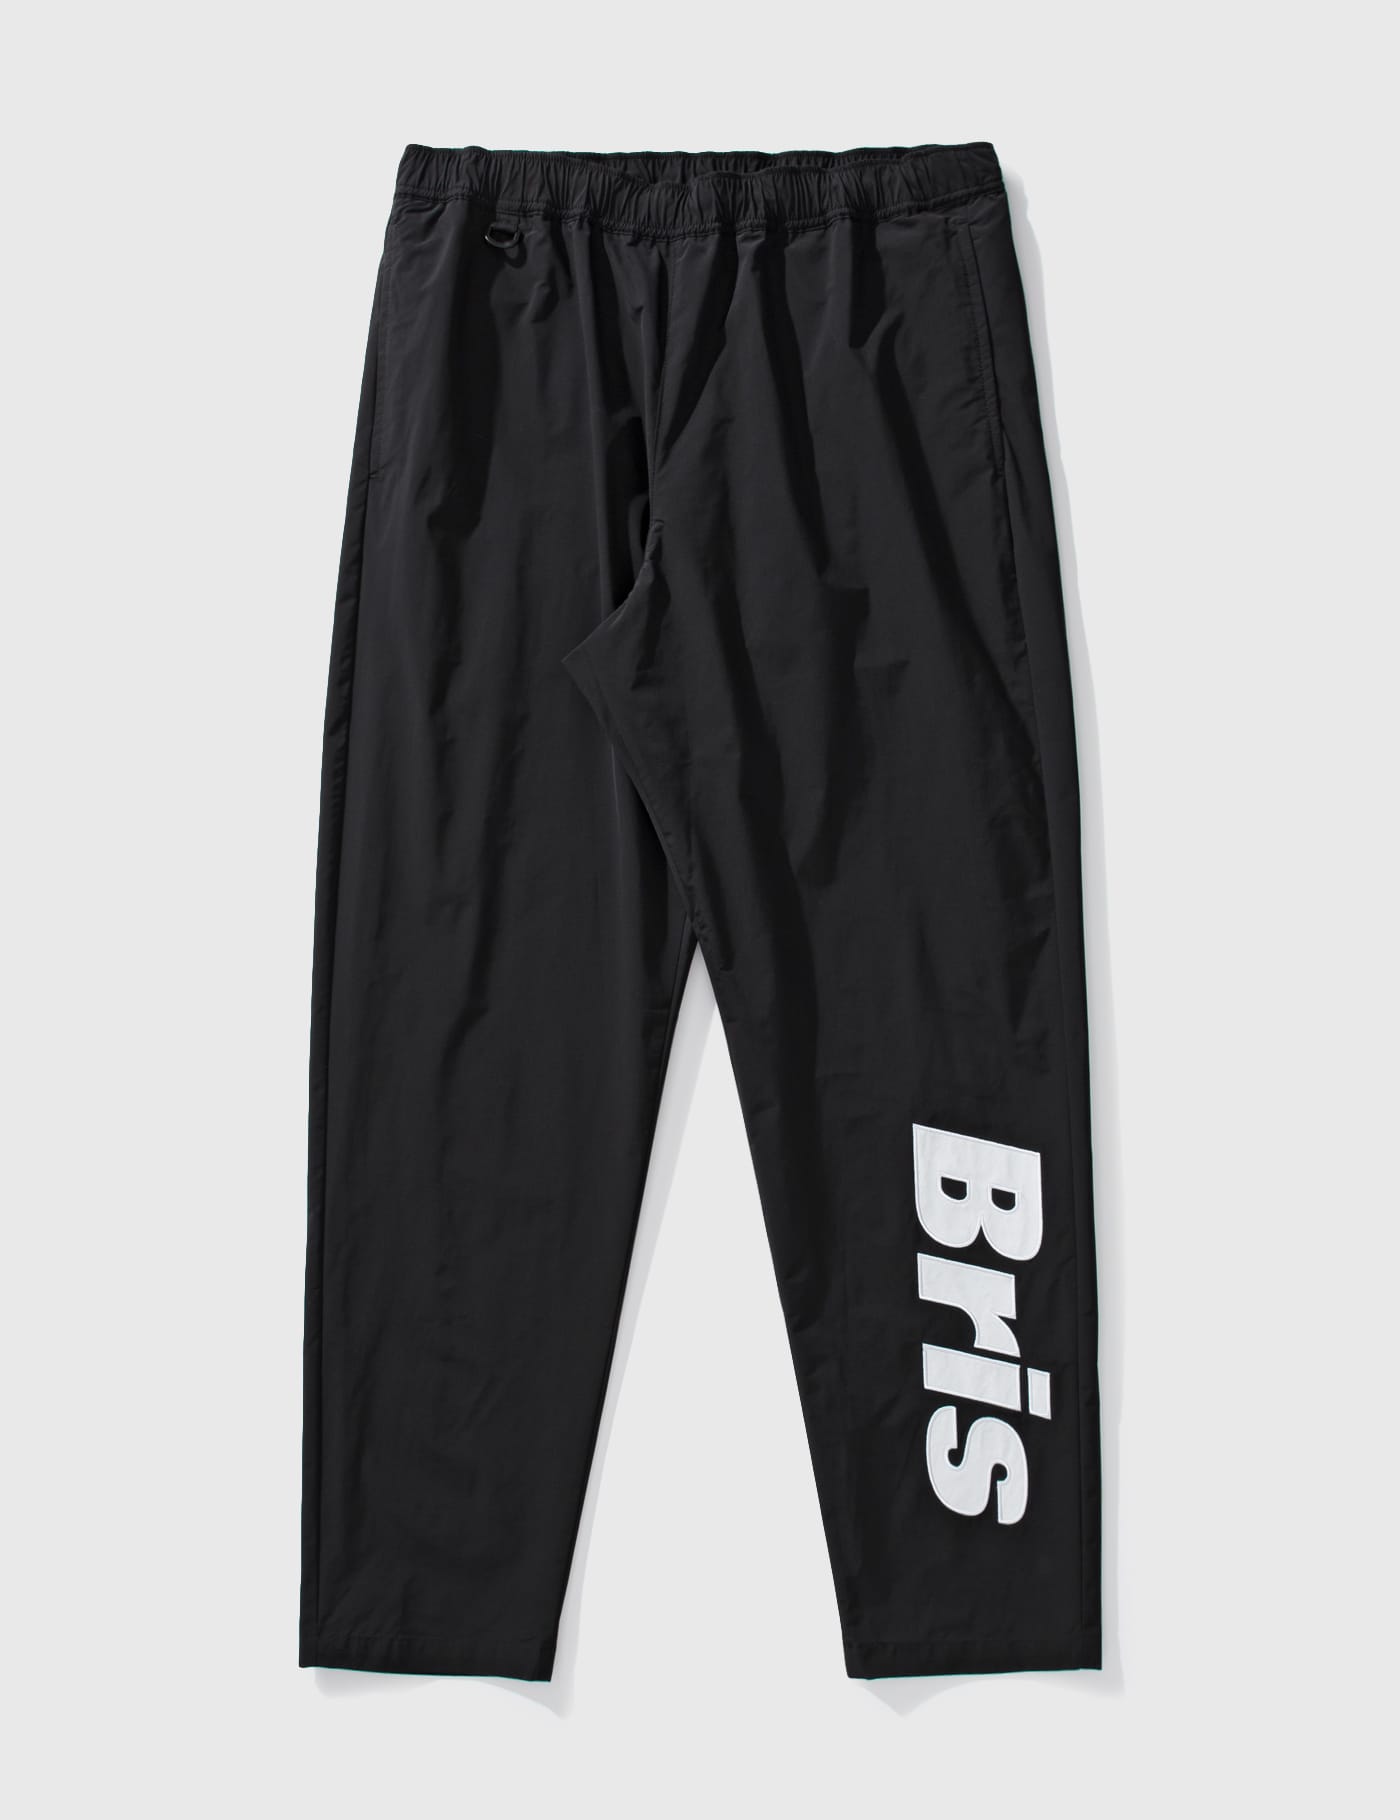 F.C. Real Bristol - Logo Appliqué Training Pants | HBX - Globally Curated  Fashion and Lifestyle by Hypebeast